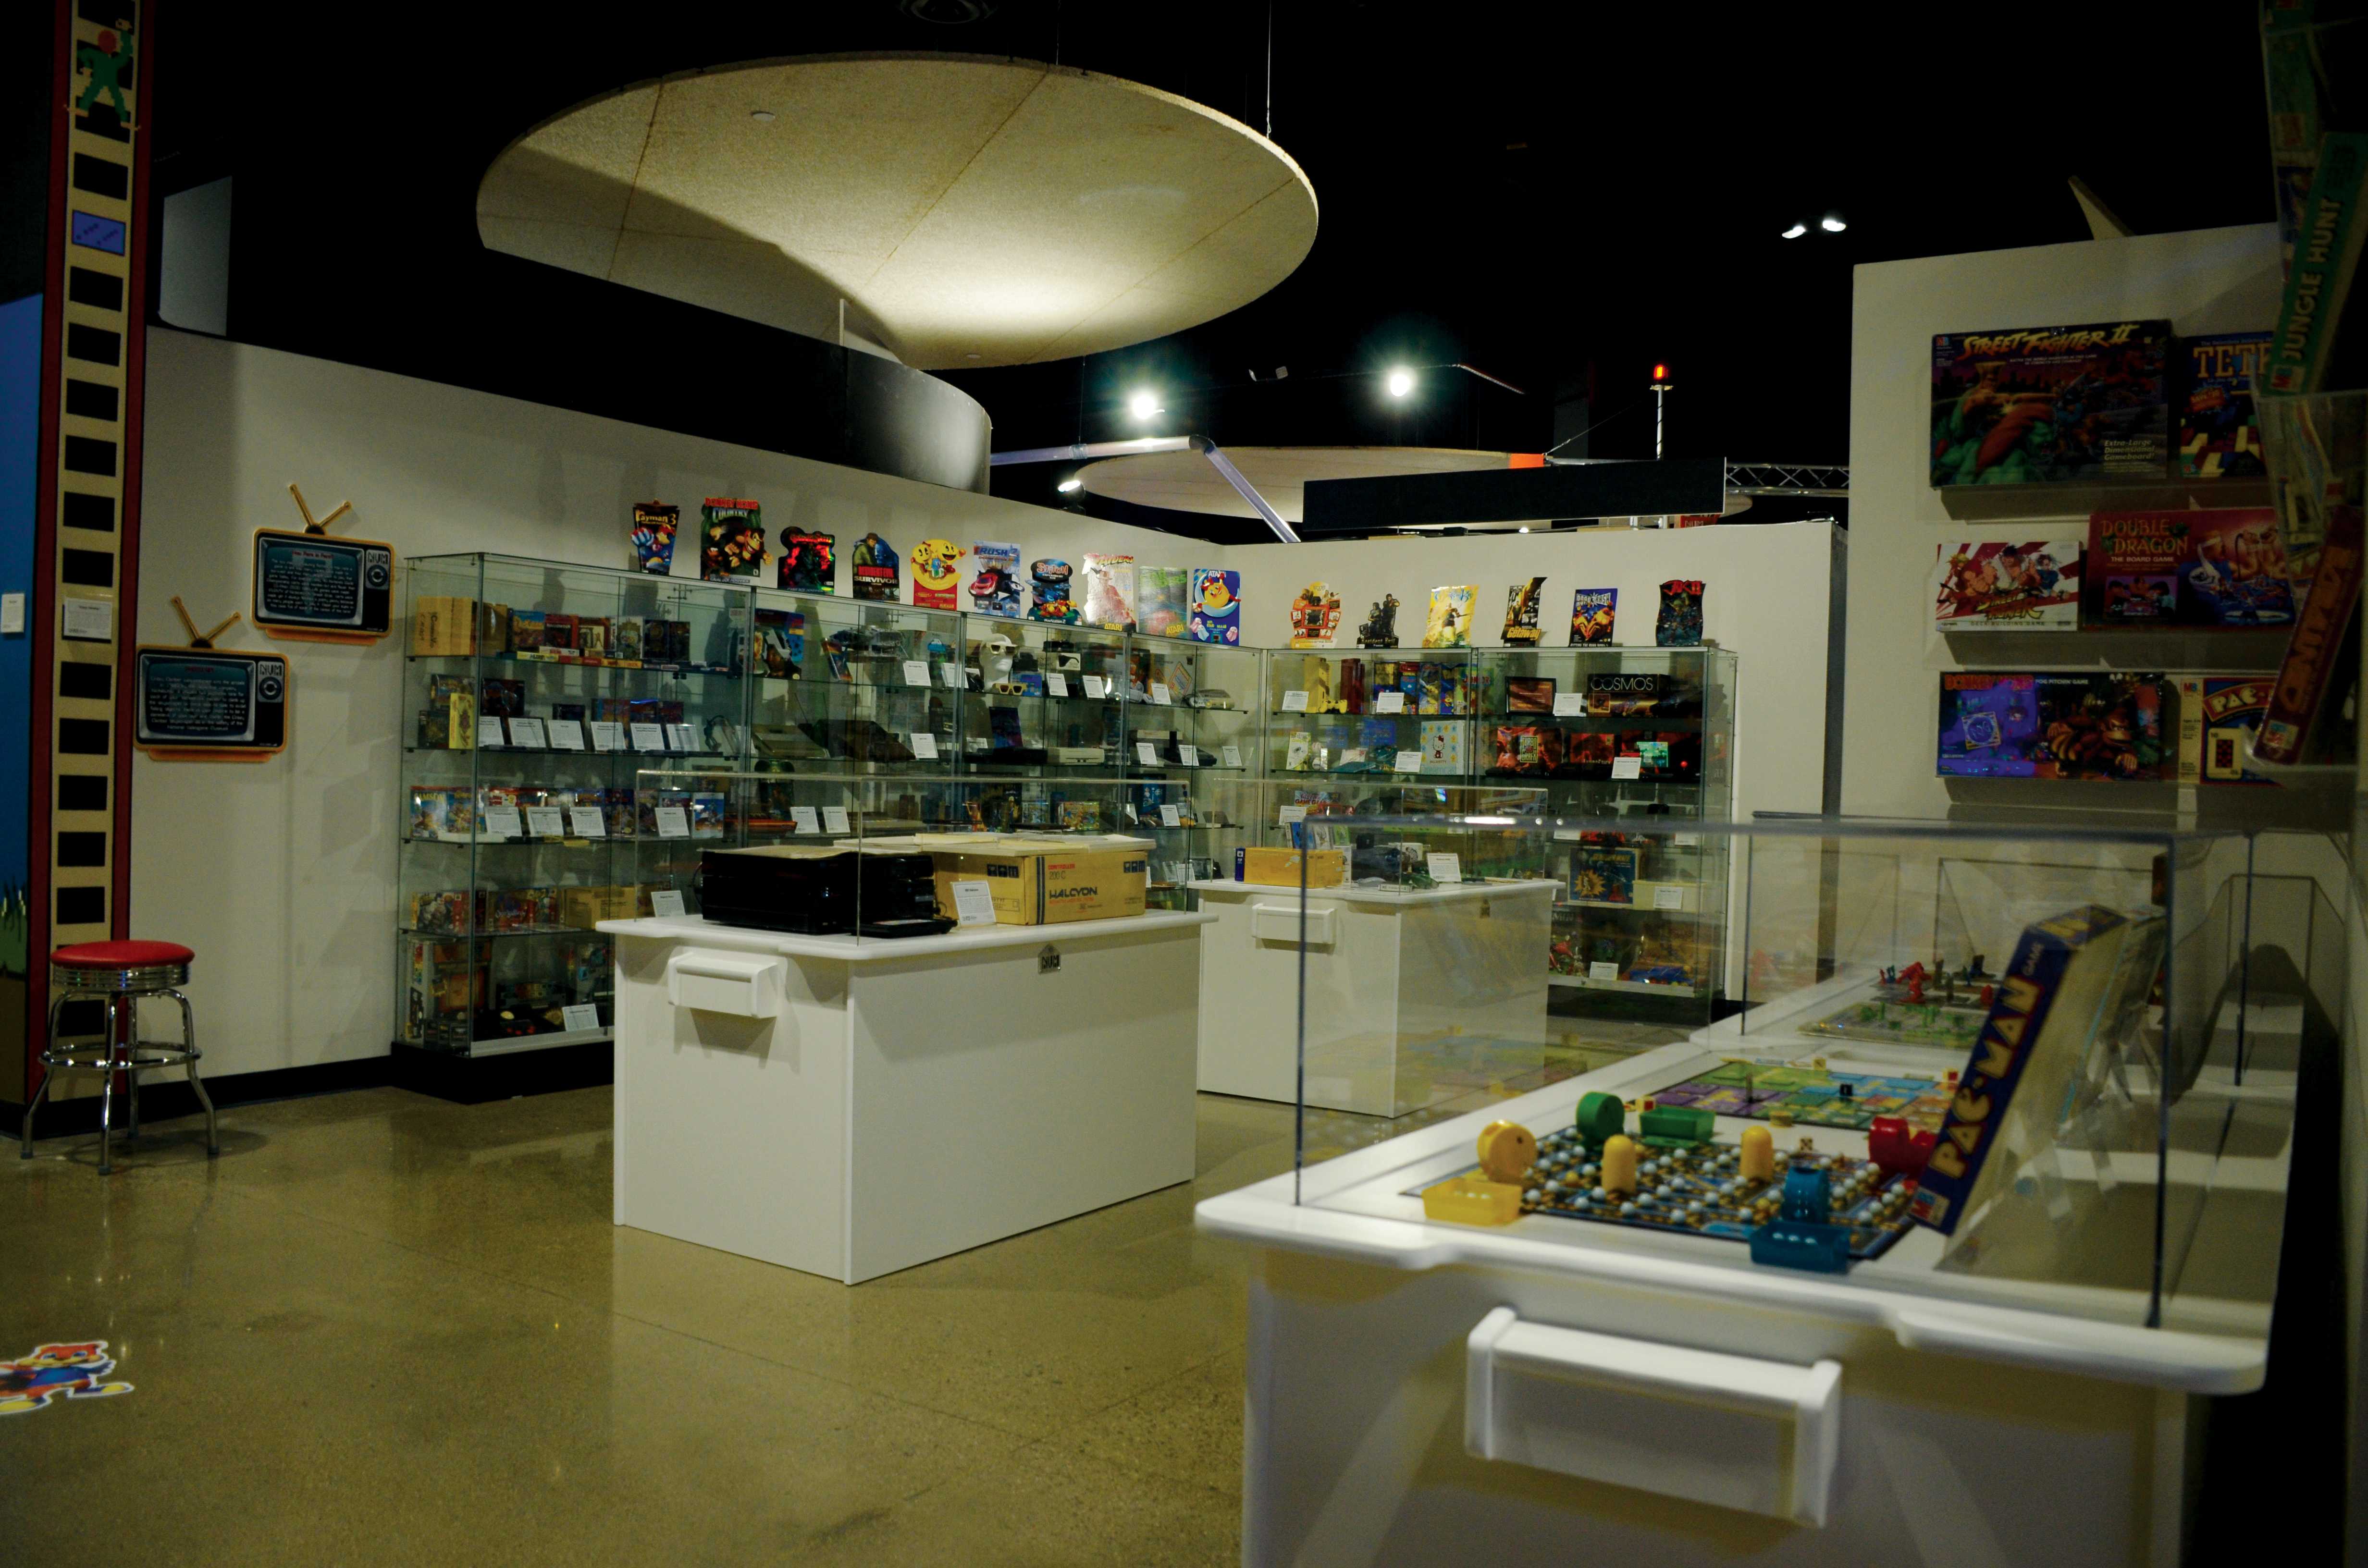 Video game memorabilia lines the walls of the museum.